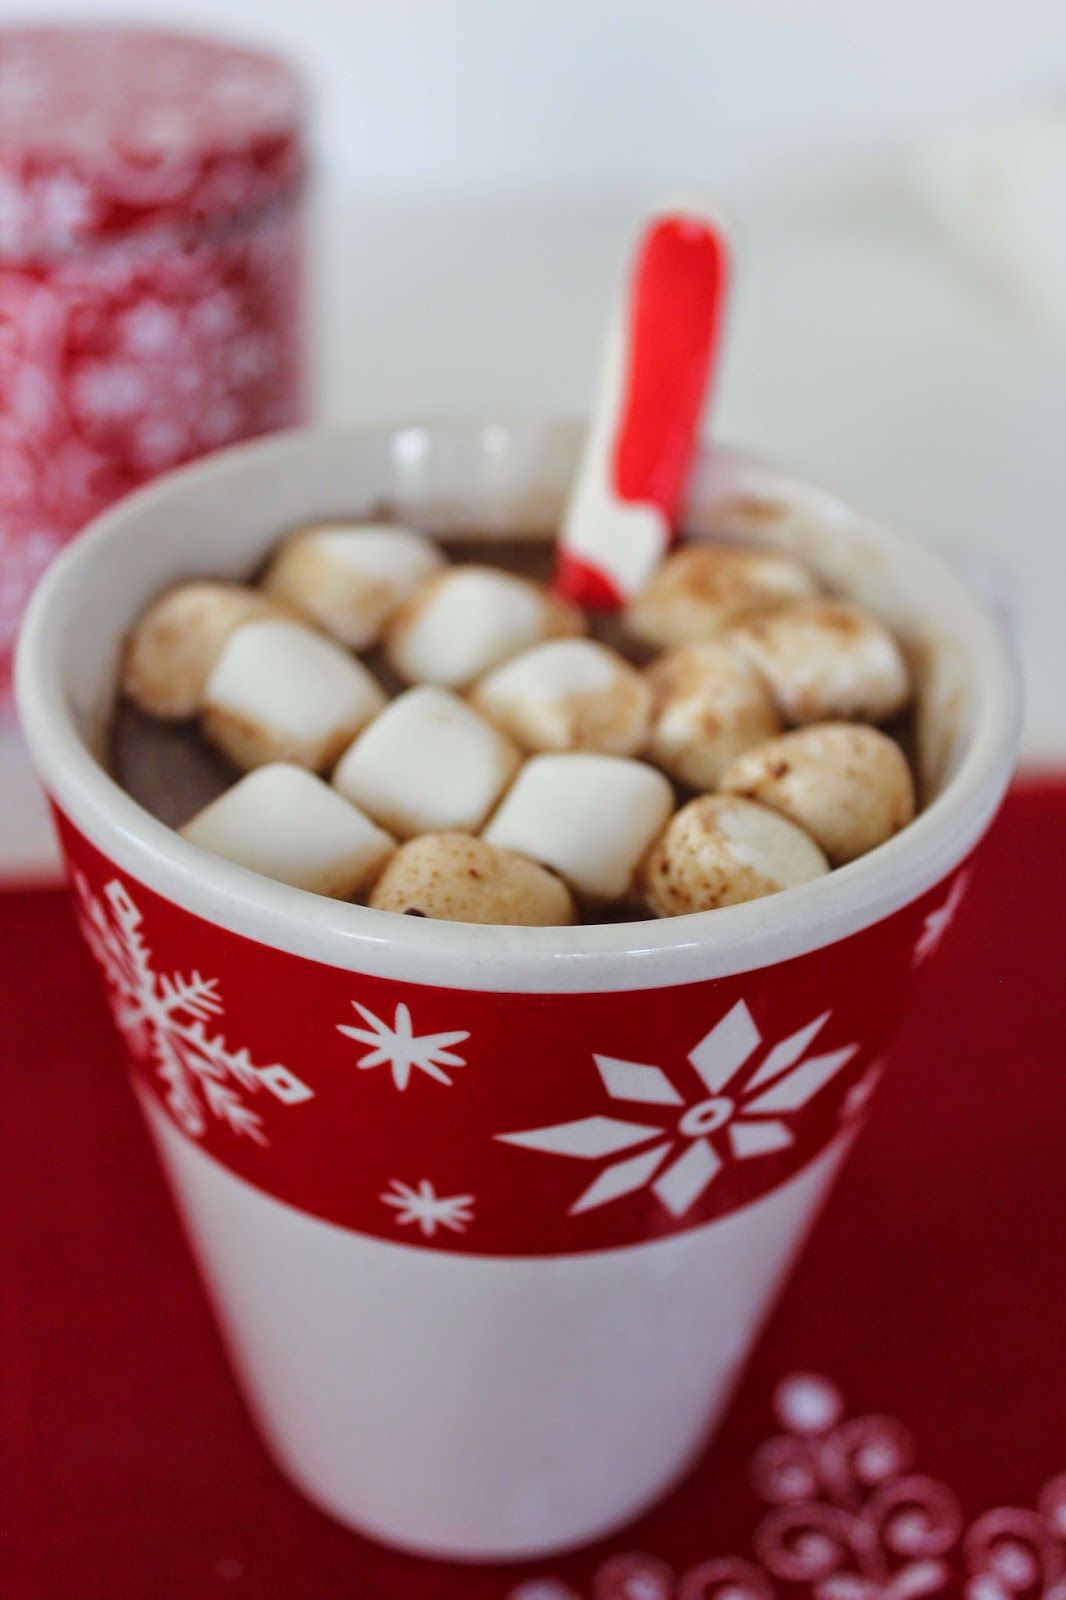 Crock Pot Hot Cocoa Recipe! Try this Easy and Delicious Hot Chocolate